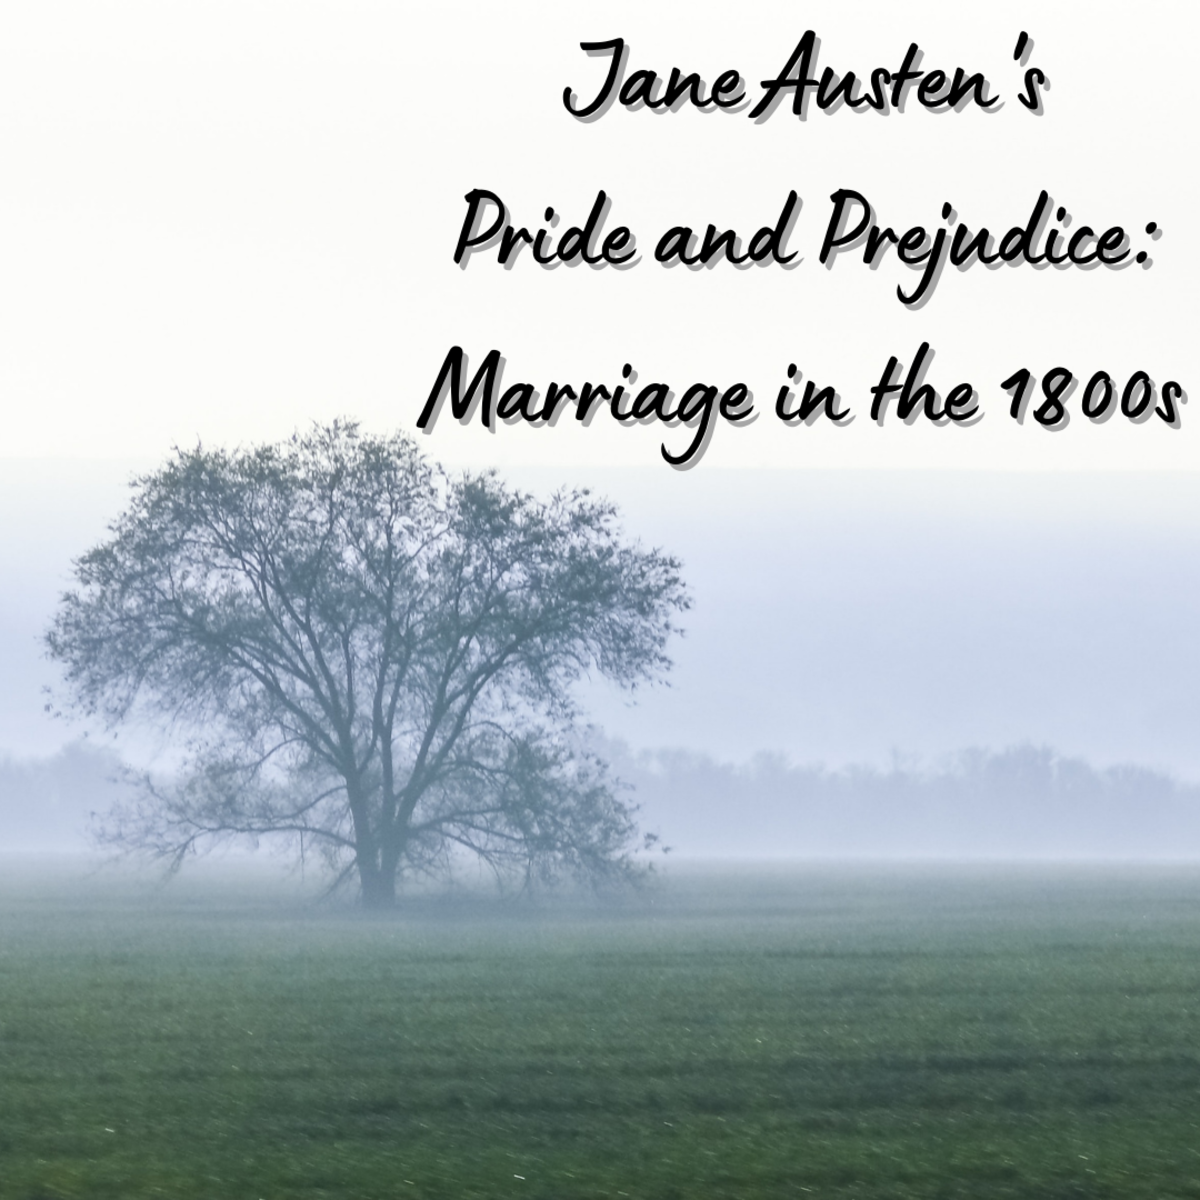 This article discusses the portrayal of marriage in Pride and Prejudice by Jane Austen.